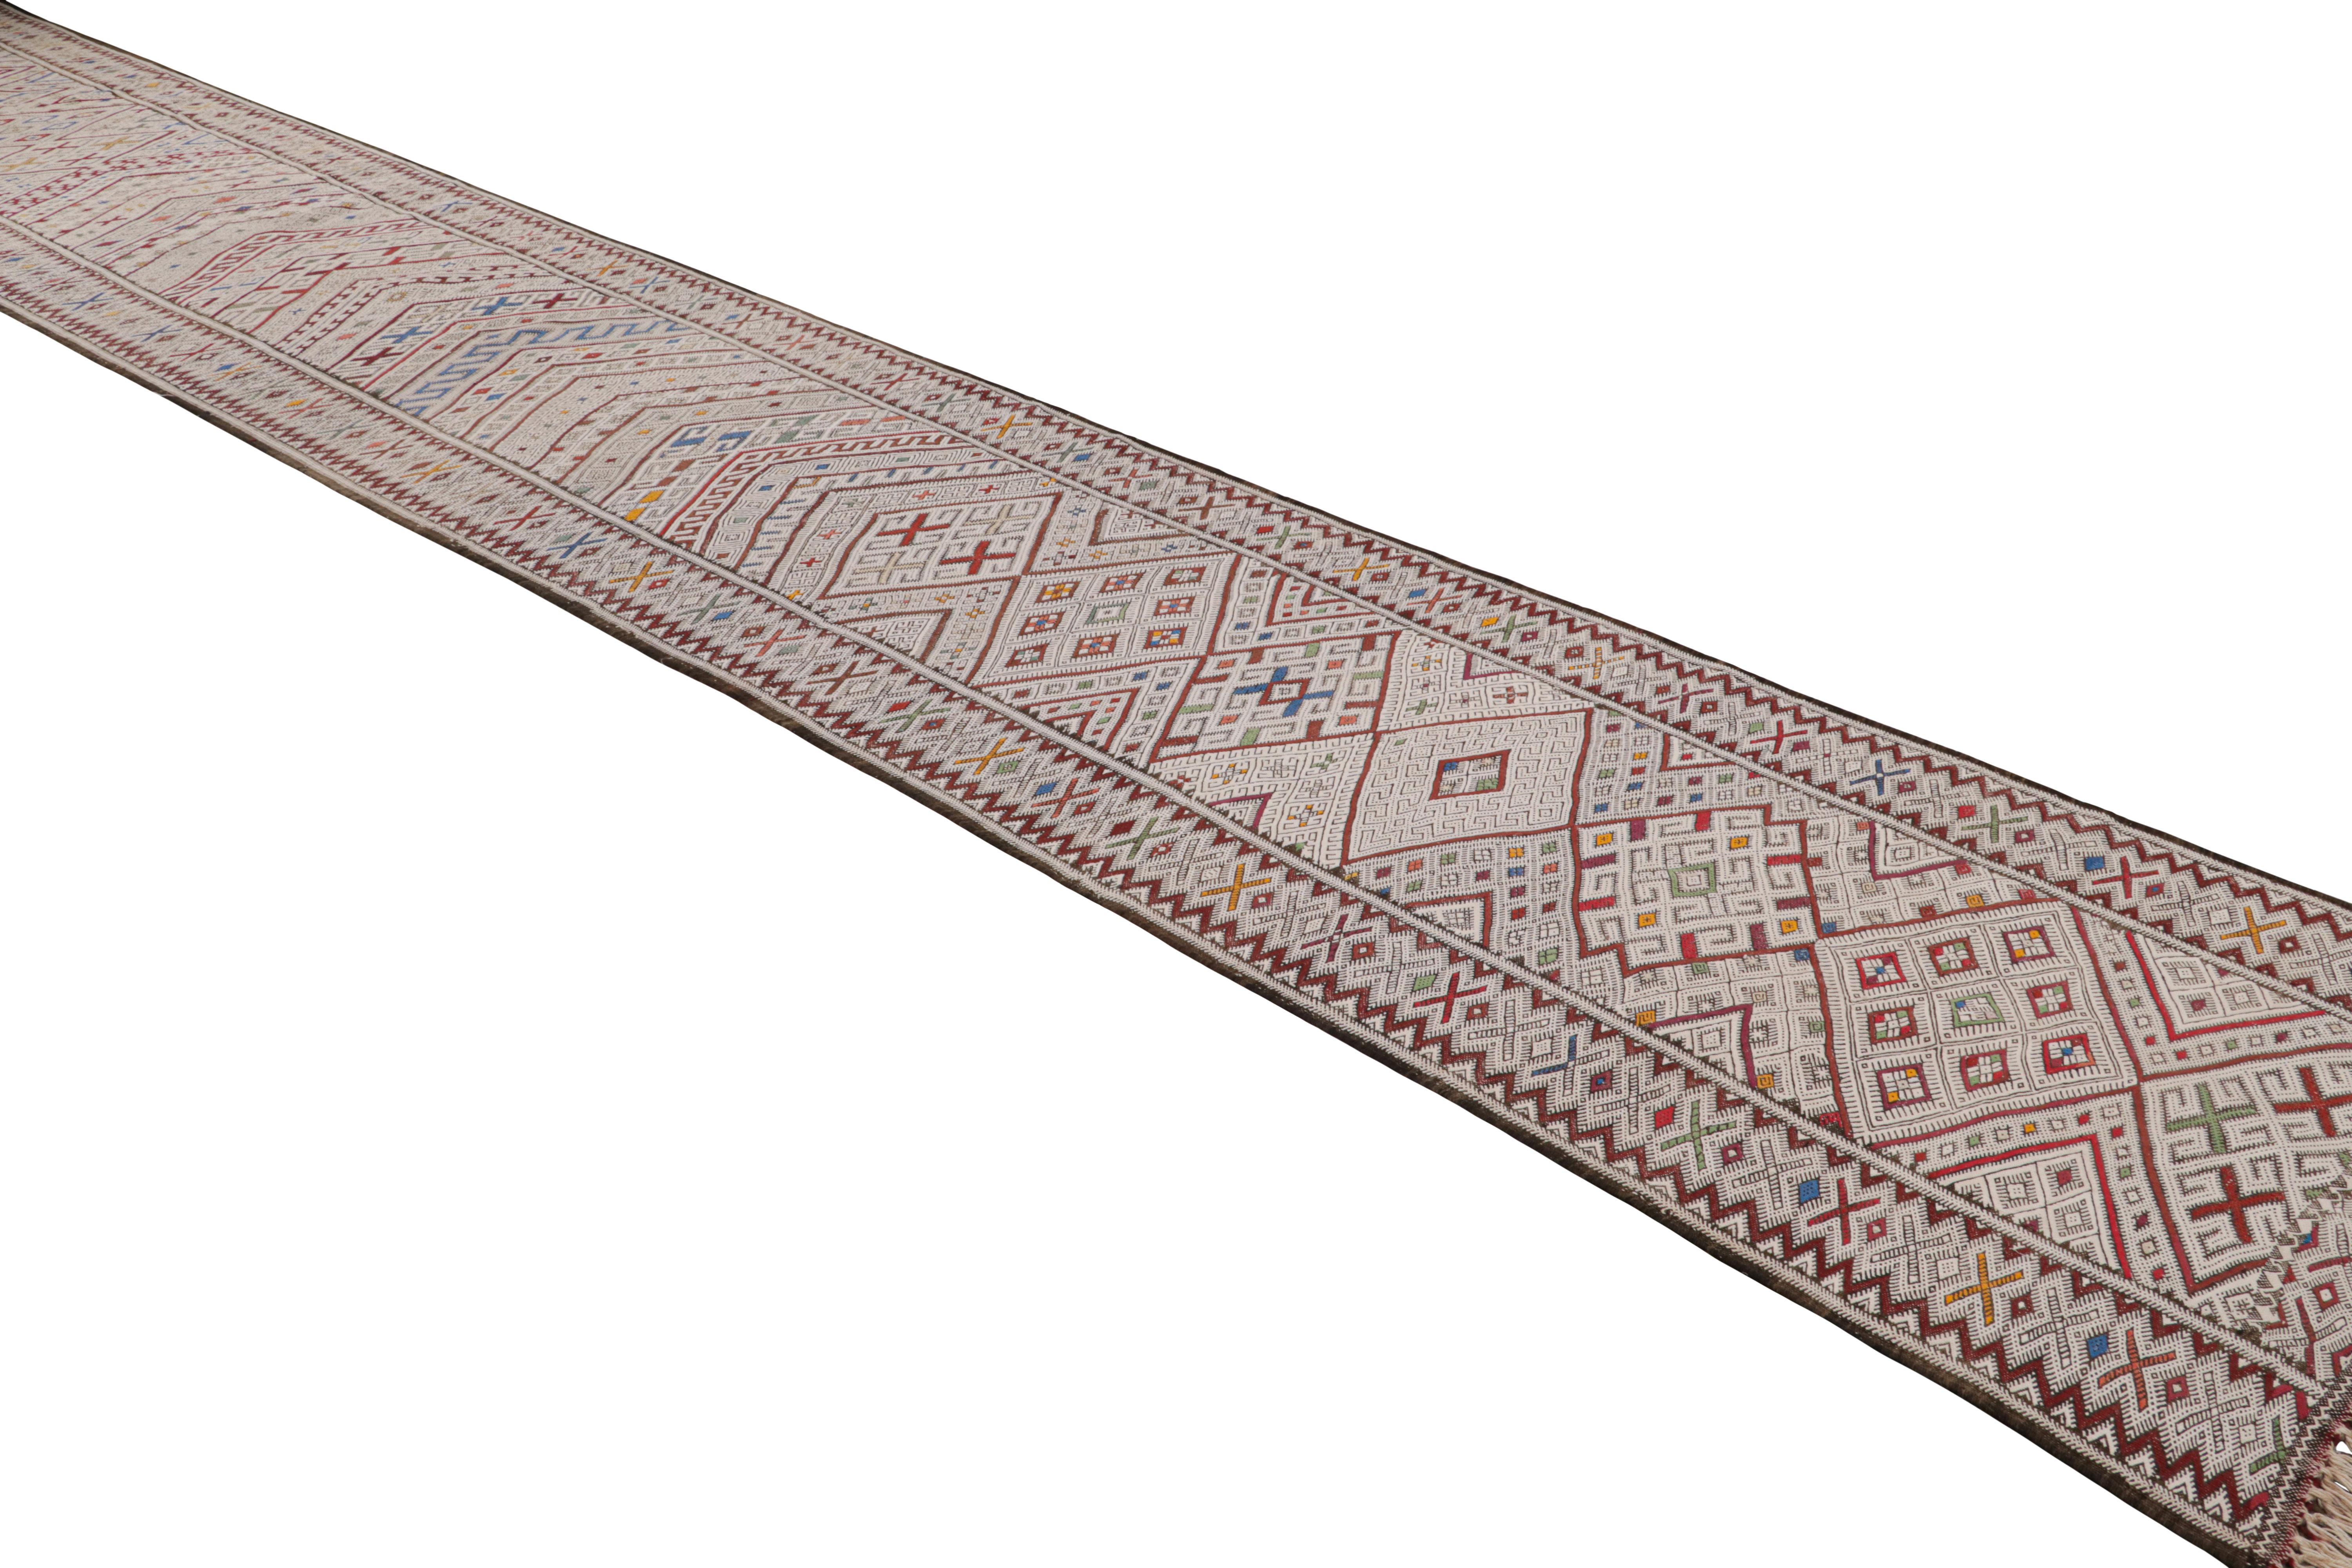 This 3x23 vintage Moroccan kilim runner is a Zayane rug from the tribe of the same name–handwoven in wool circa 1950-1960.

On the Design:

This flatweave enjoys patterns in polychromatic colorways, with notably present white and brown tones among